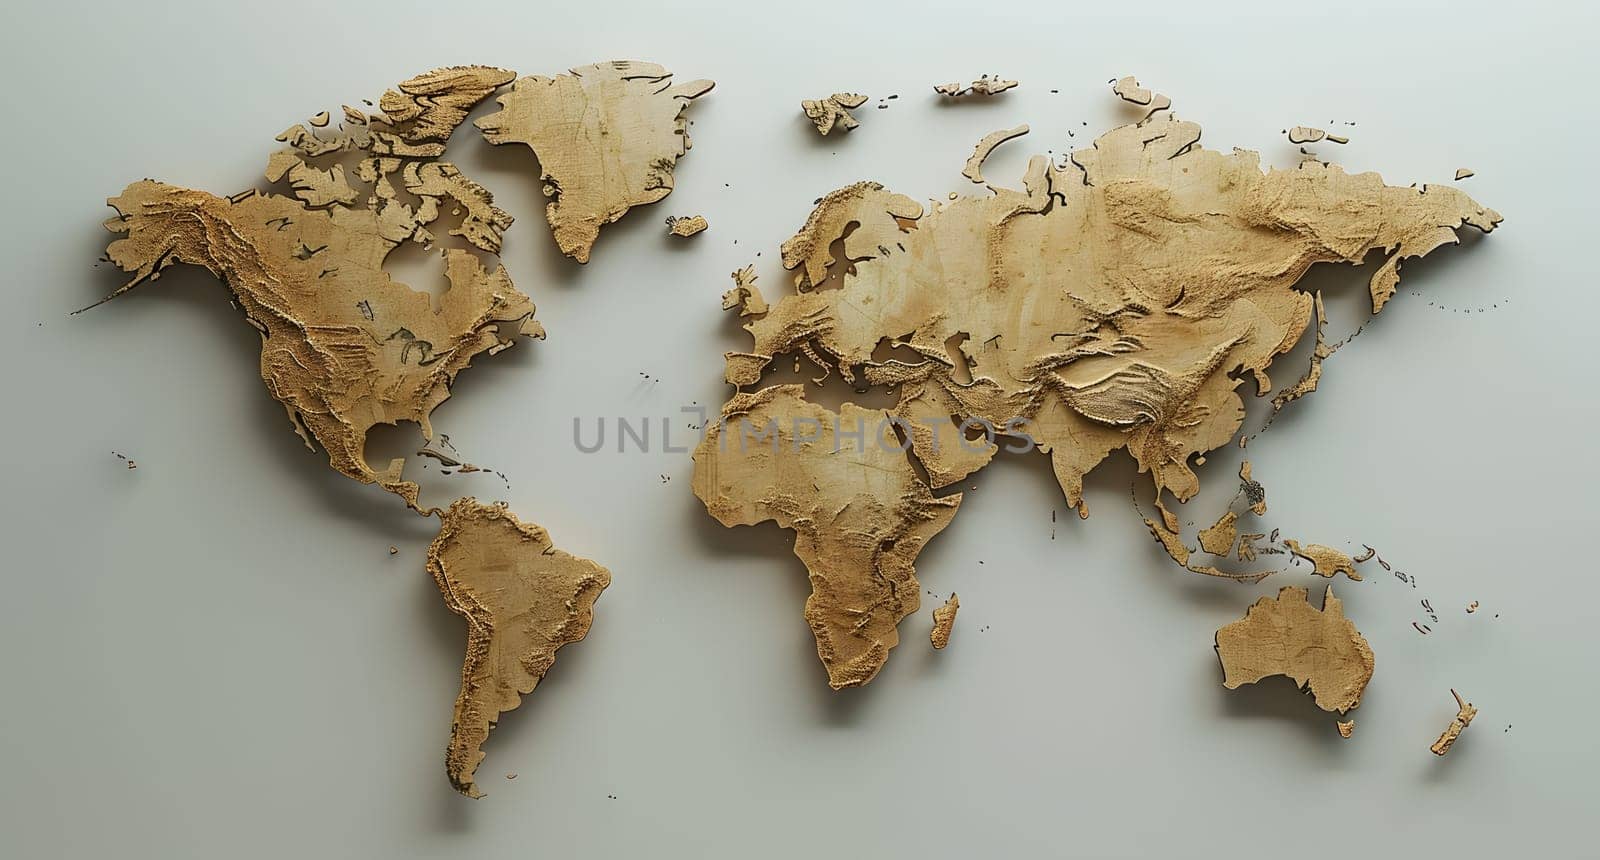 A wooden map of the world is displayed on a white surface, showcasing different regions known for their unique cuisine and staple foods made from various ingredients and plants